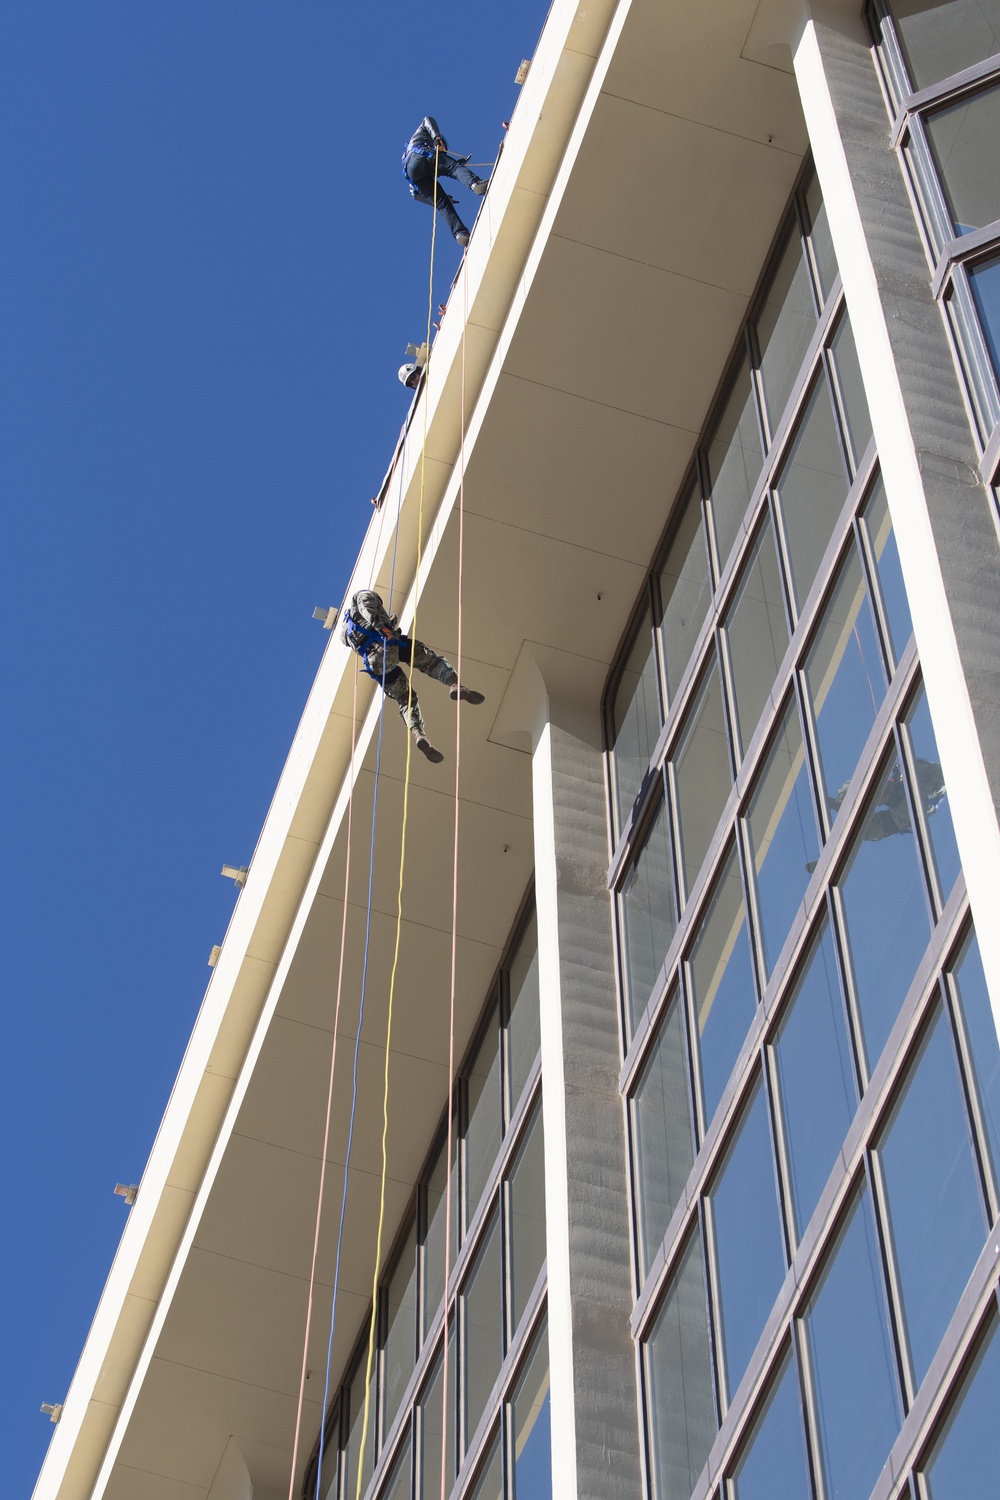 Future Soldiers rappel off Building